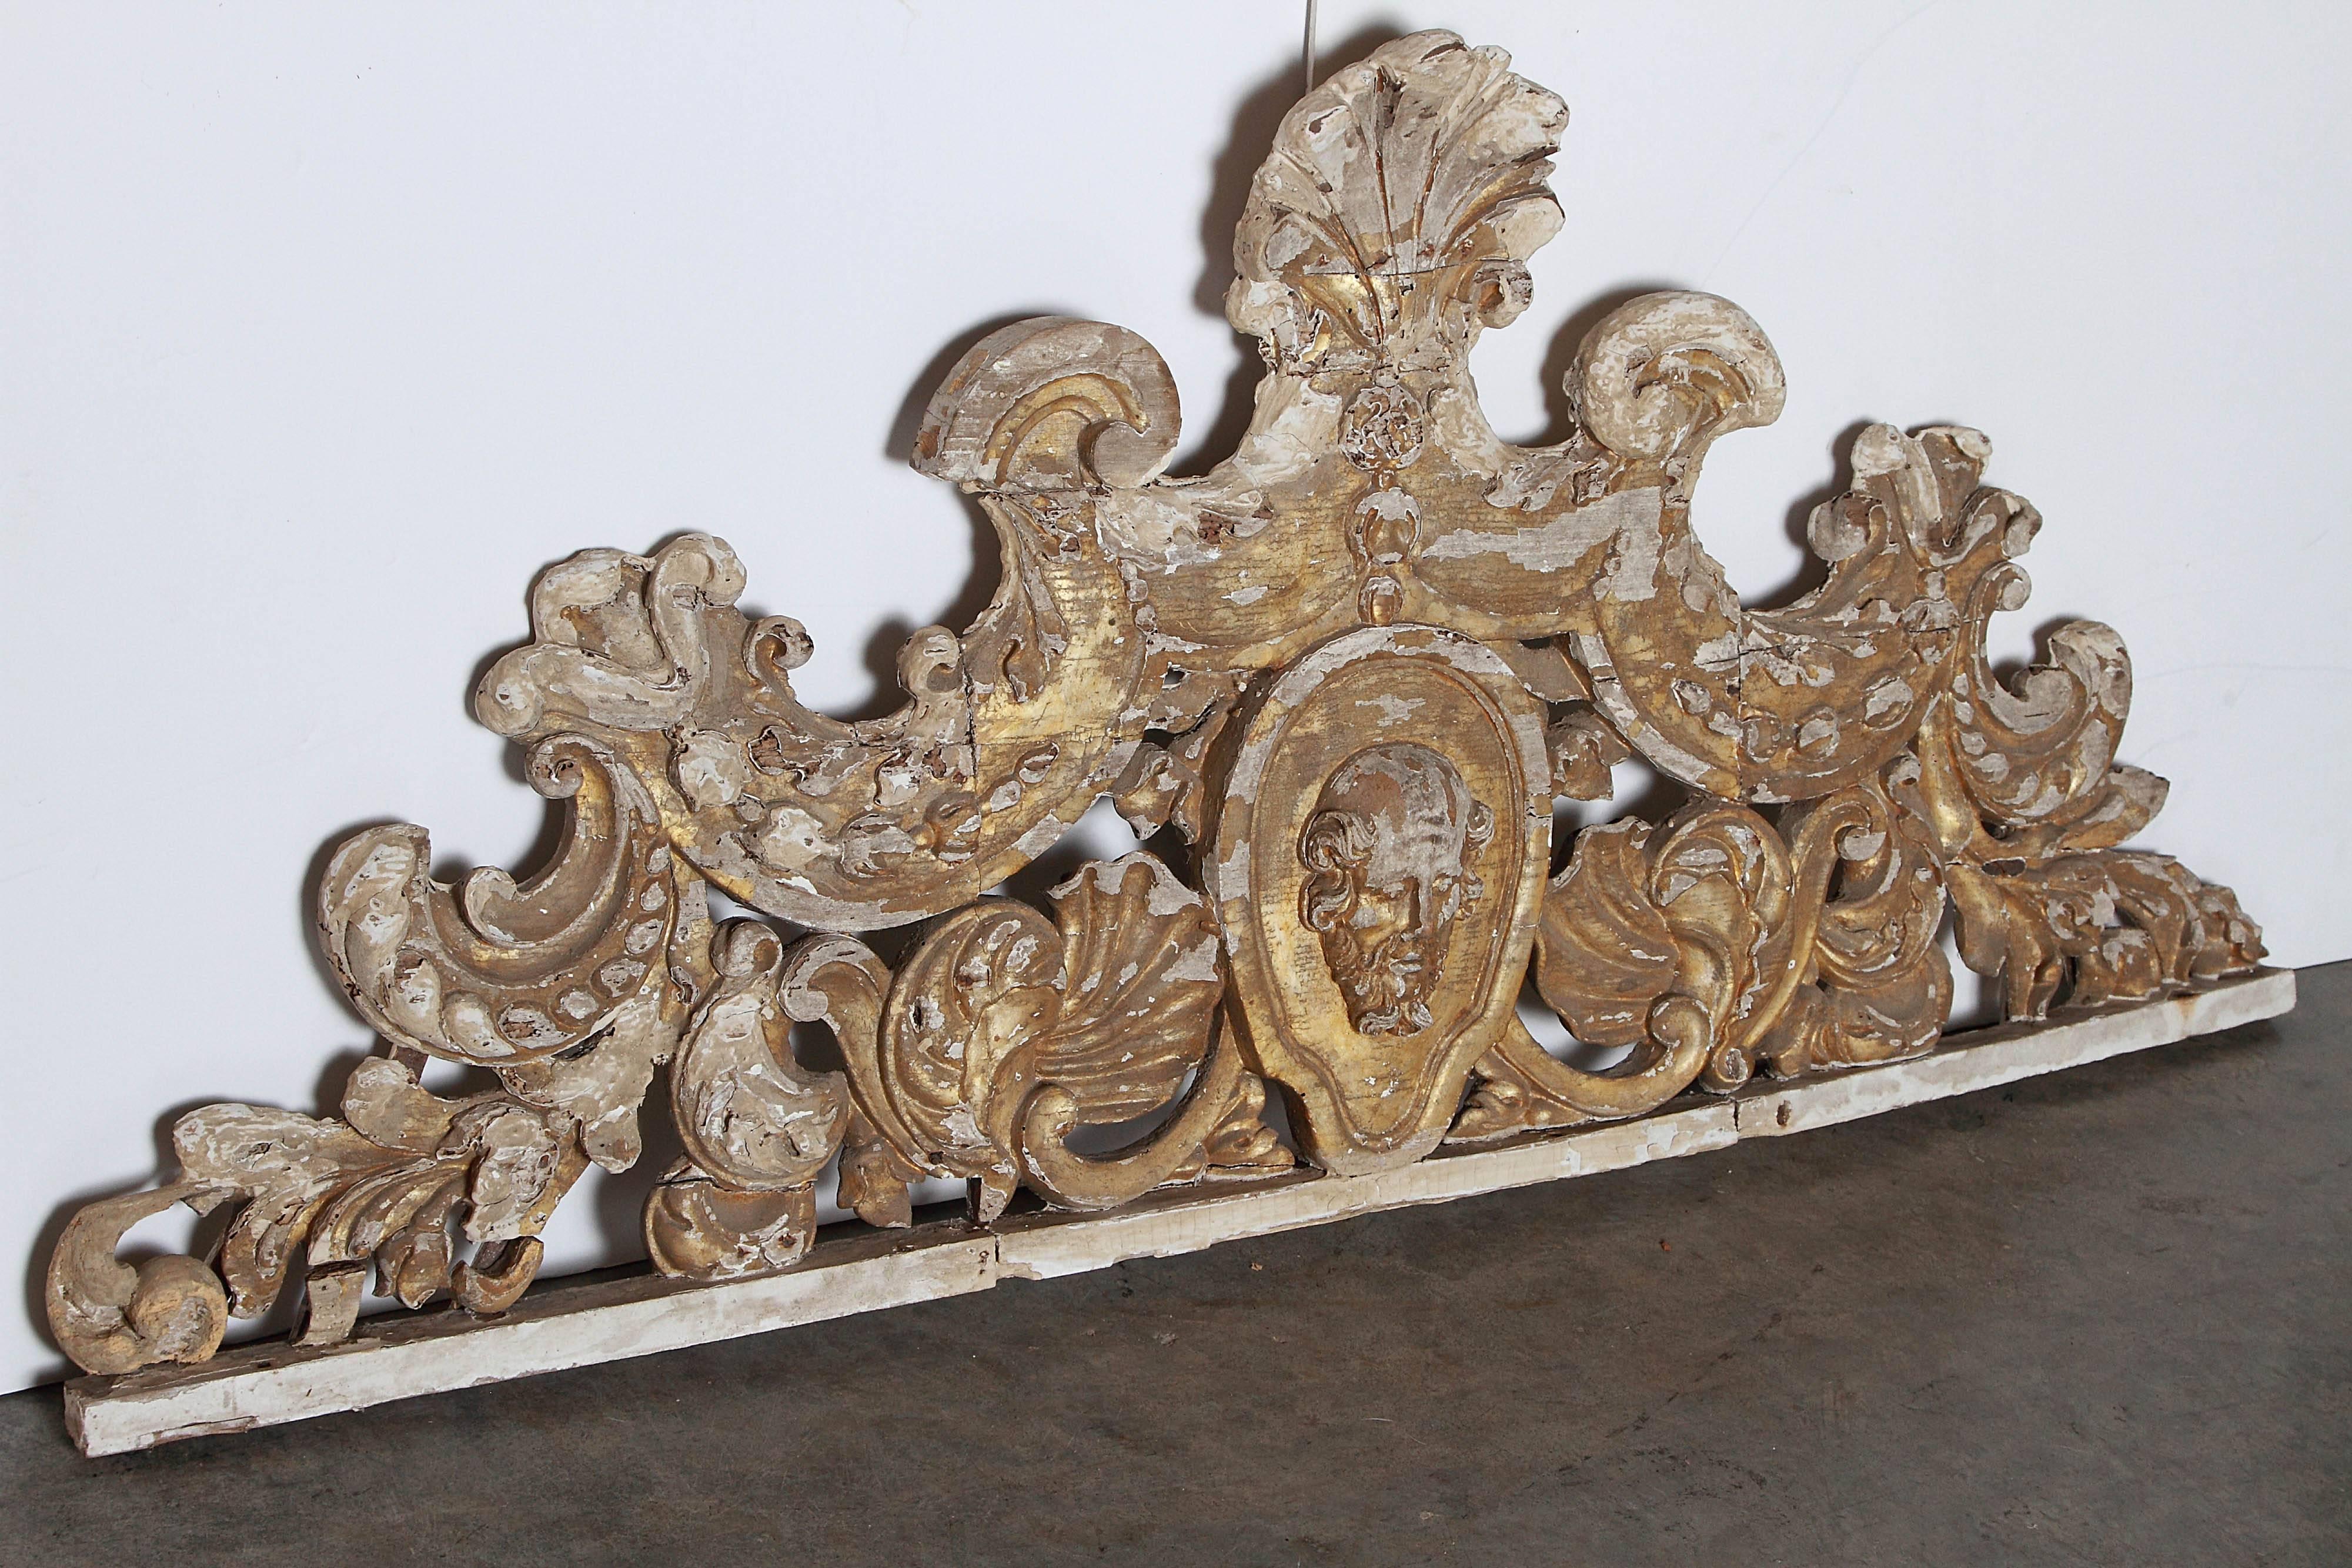 This extraordinary hand carved overdoor from Sicily dates to the 1700’s.  In the Baroque style, the carvings have flourishes of rocaille, gadrooned leaves, stylized shells, c-scrolls, feathered acanthus leaves, and a central oval with a mascaron. 